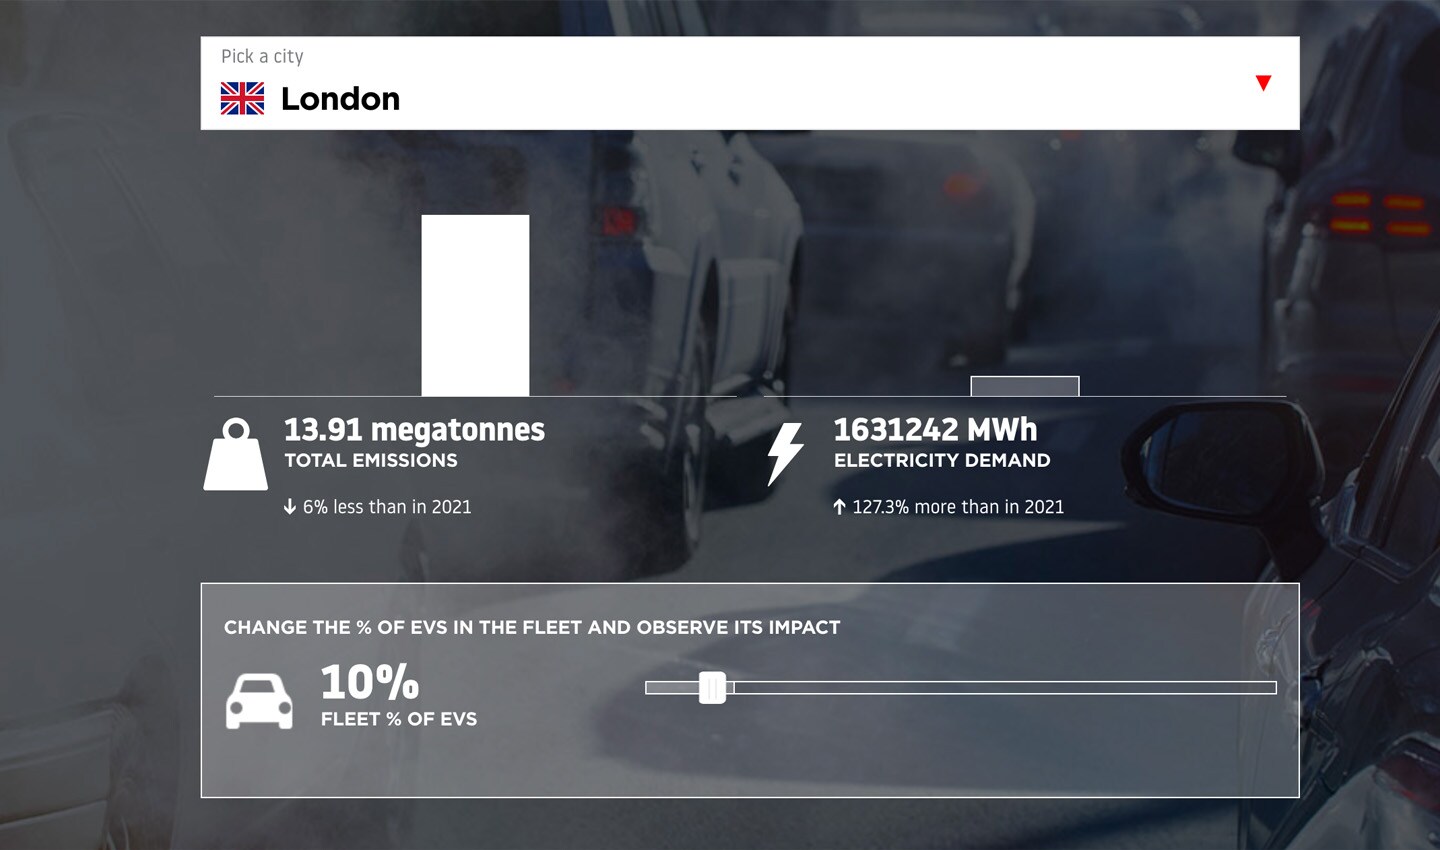 If London could increase it’s the share of EVs on its roads to 10% of its fleet, then emissions would drop considerably — by around 6%.